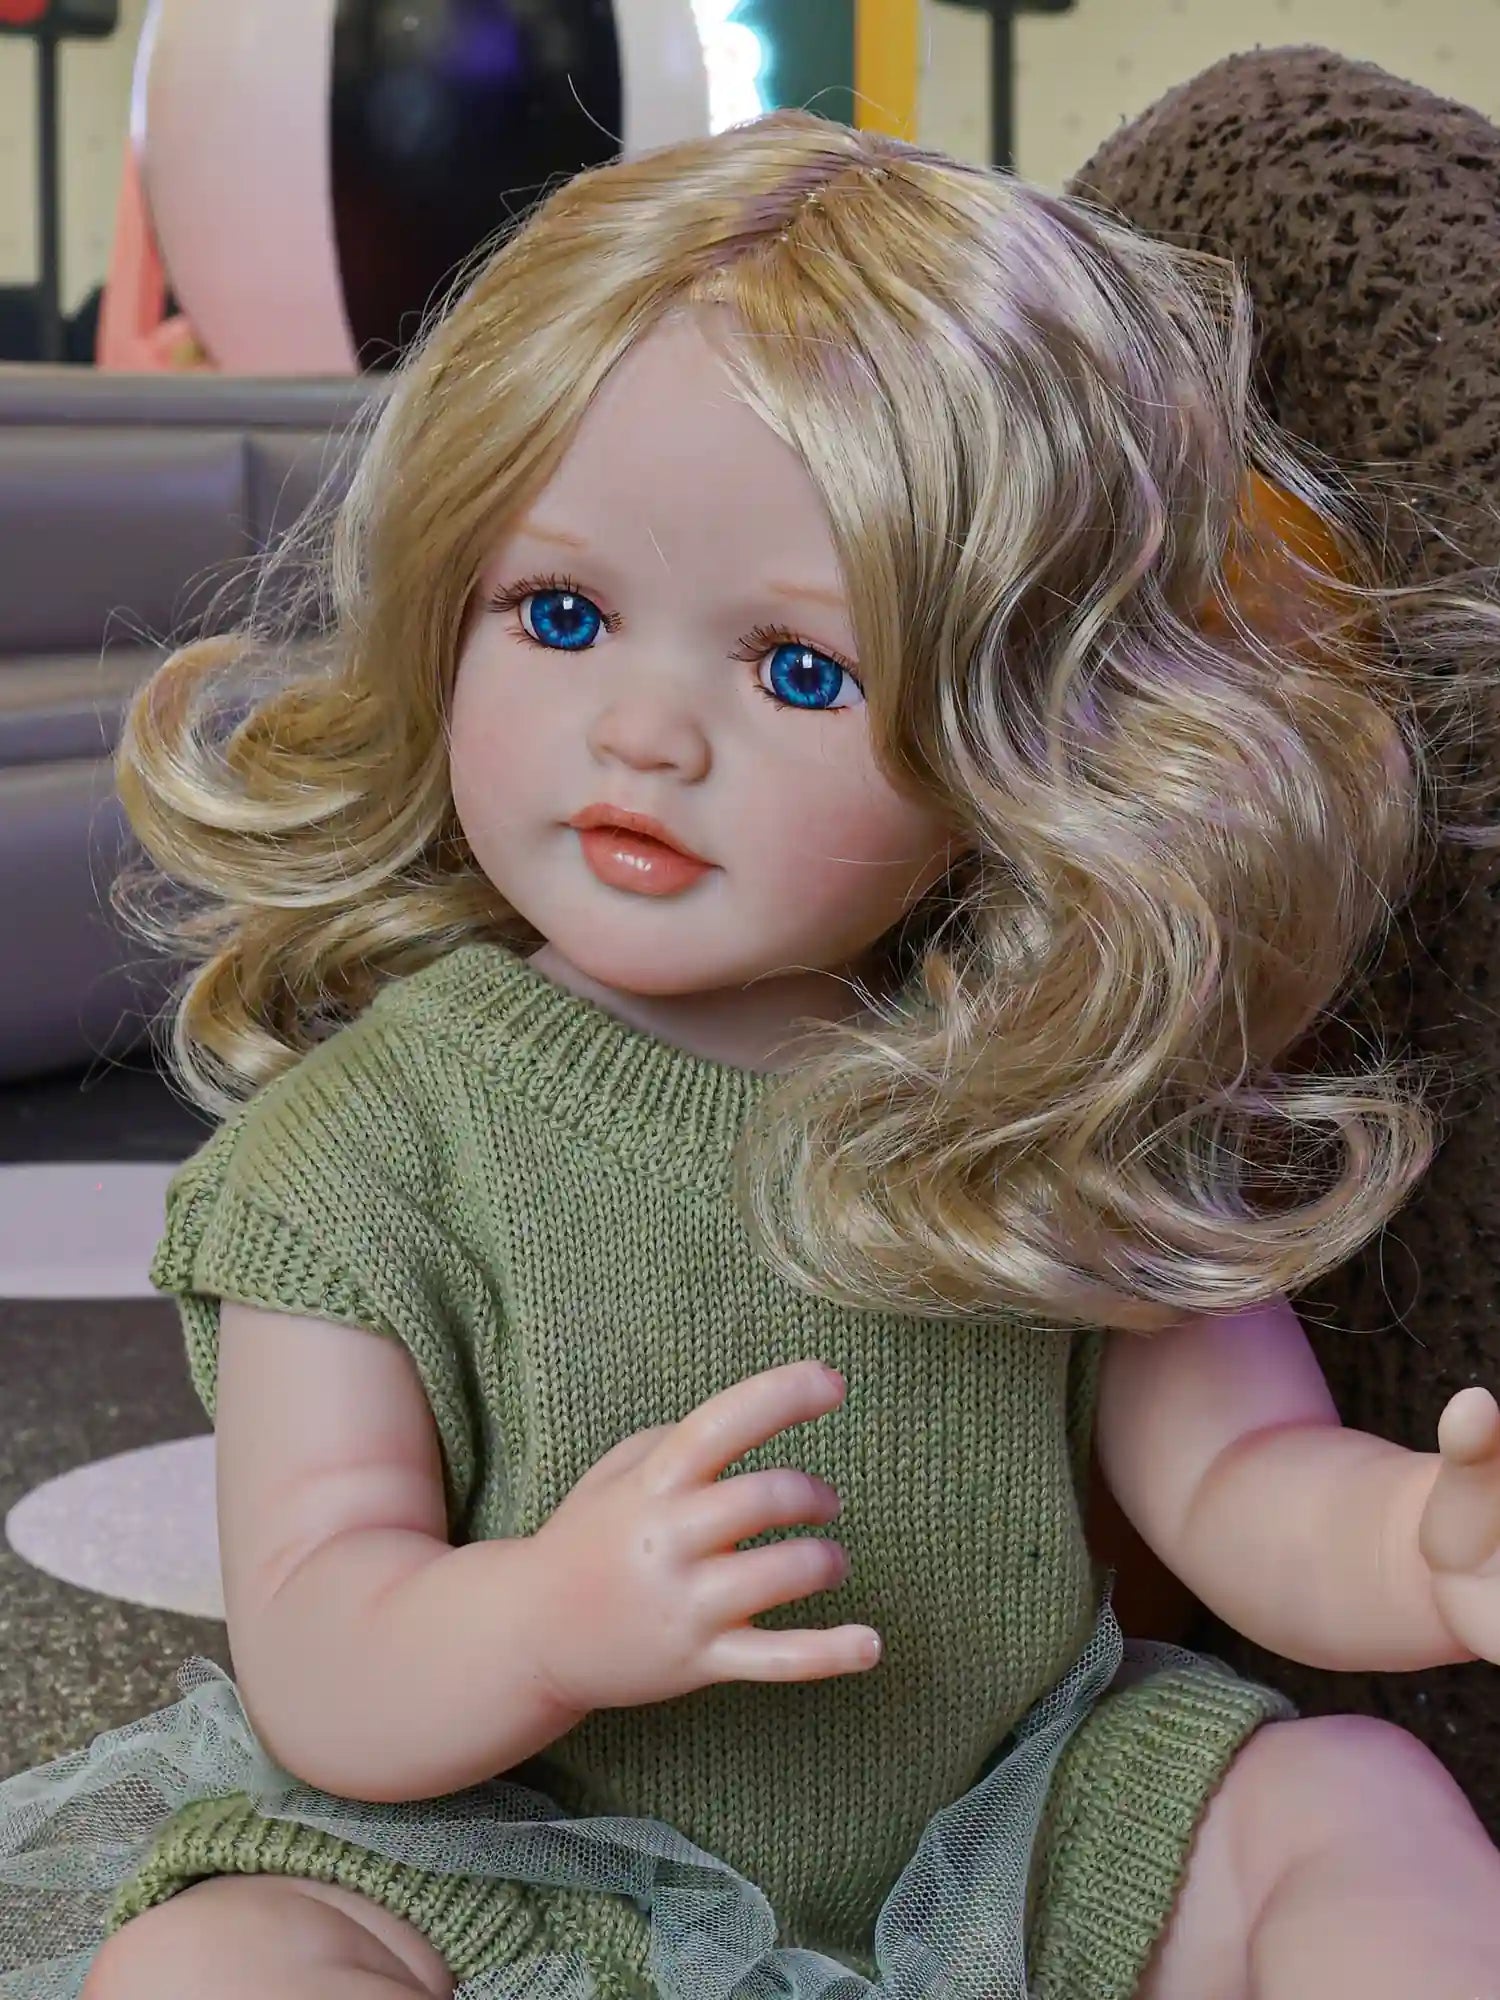 Marvel at the delicate artistry of our reborn doll, her sapphire eyes a striking contrast to the subtle green of her attire, capturing the essence of childhood innocence.